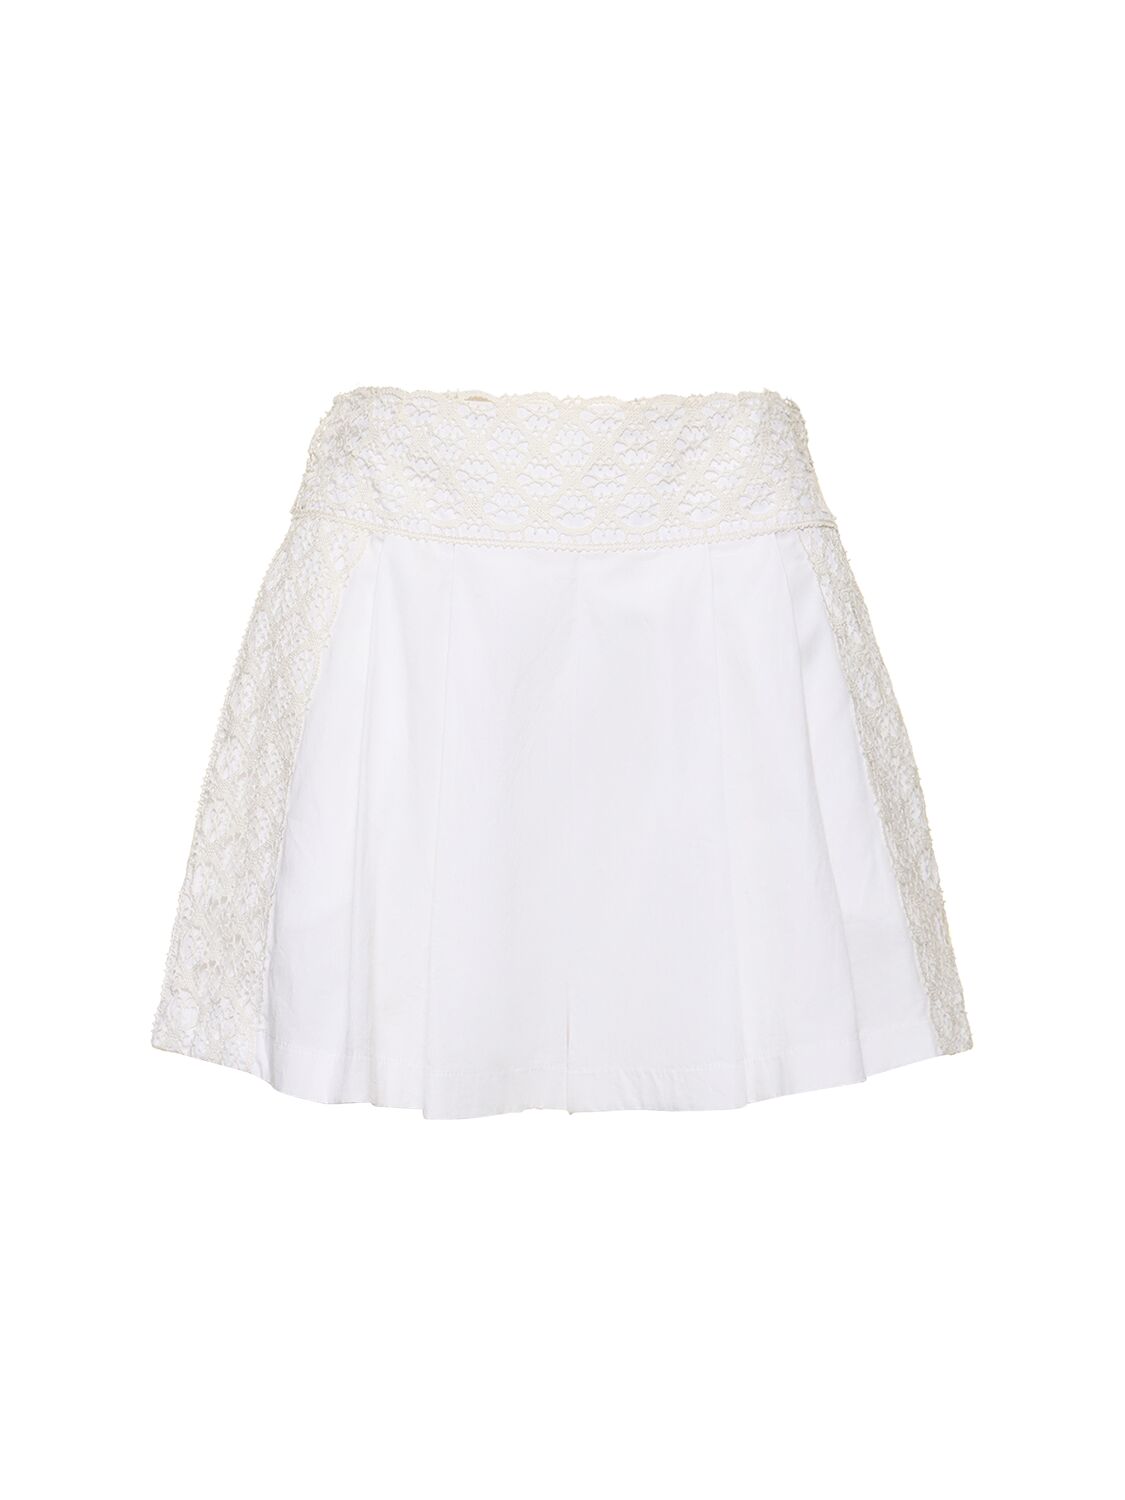 Ermanno Scervino Embroidered Pleated Cotton Shorts In White